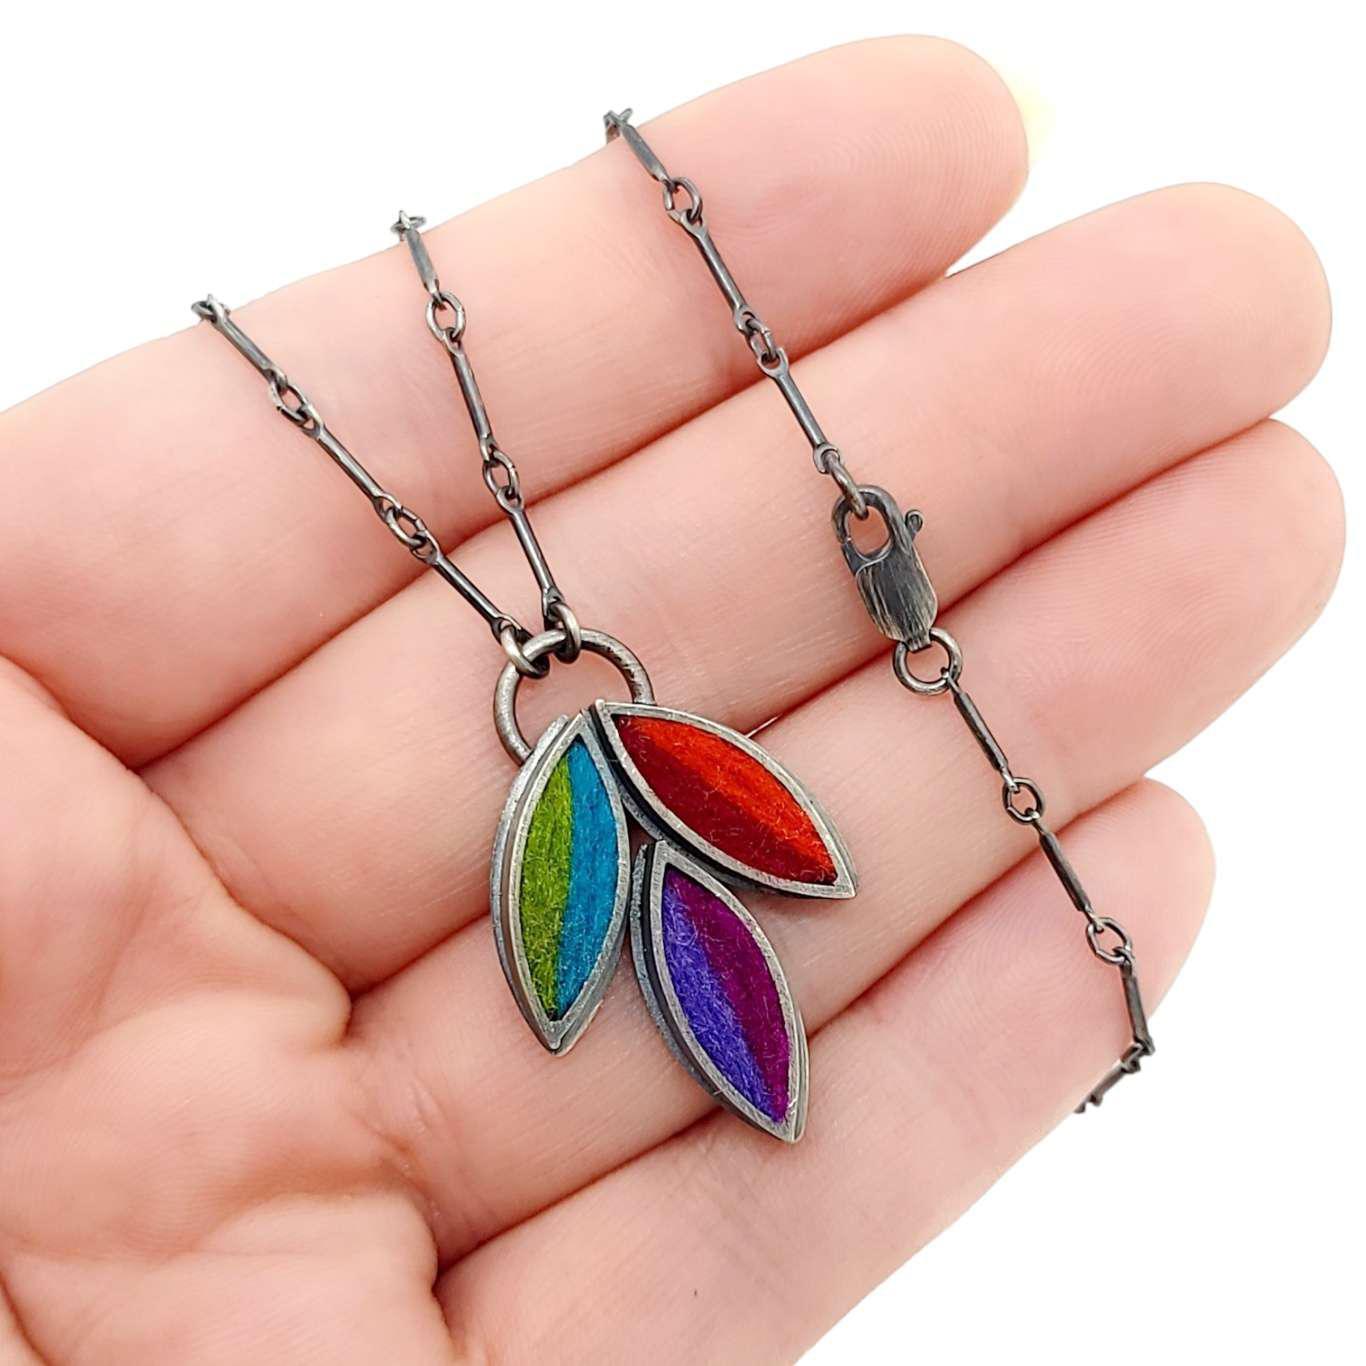 Necklace - Lotus Flower in Multicolor by Michele A. Friedman